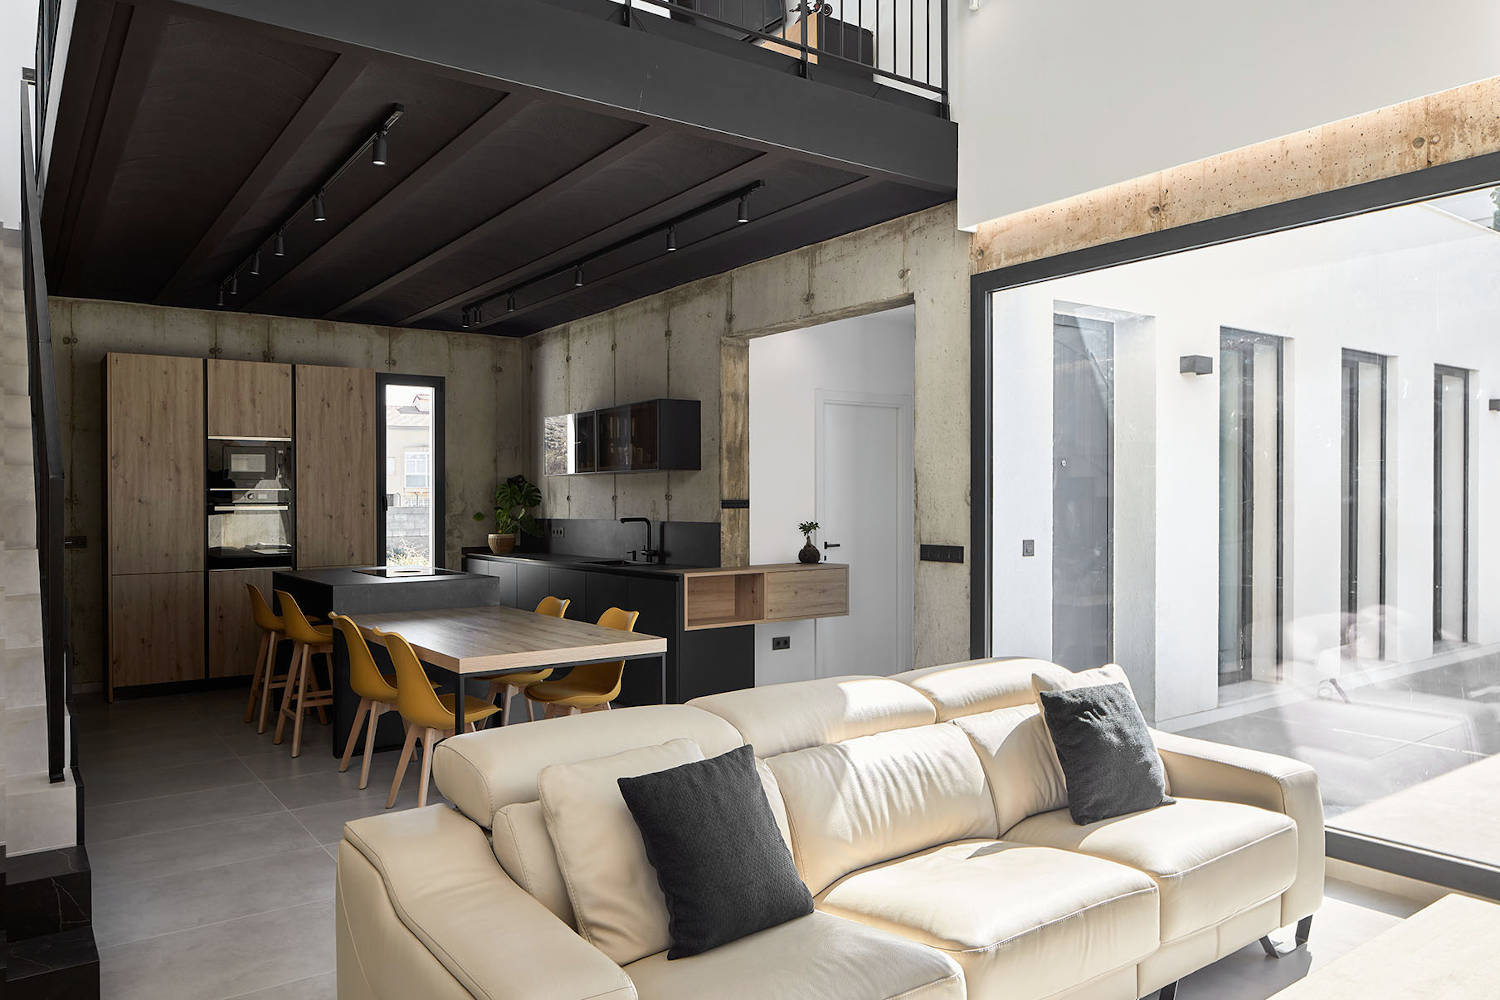 Image of 79A1927 Panorama in Silestone Seaport as the guiding thread in a renovation project that reinterprets the industrial style - Cosentino